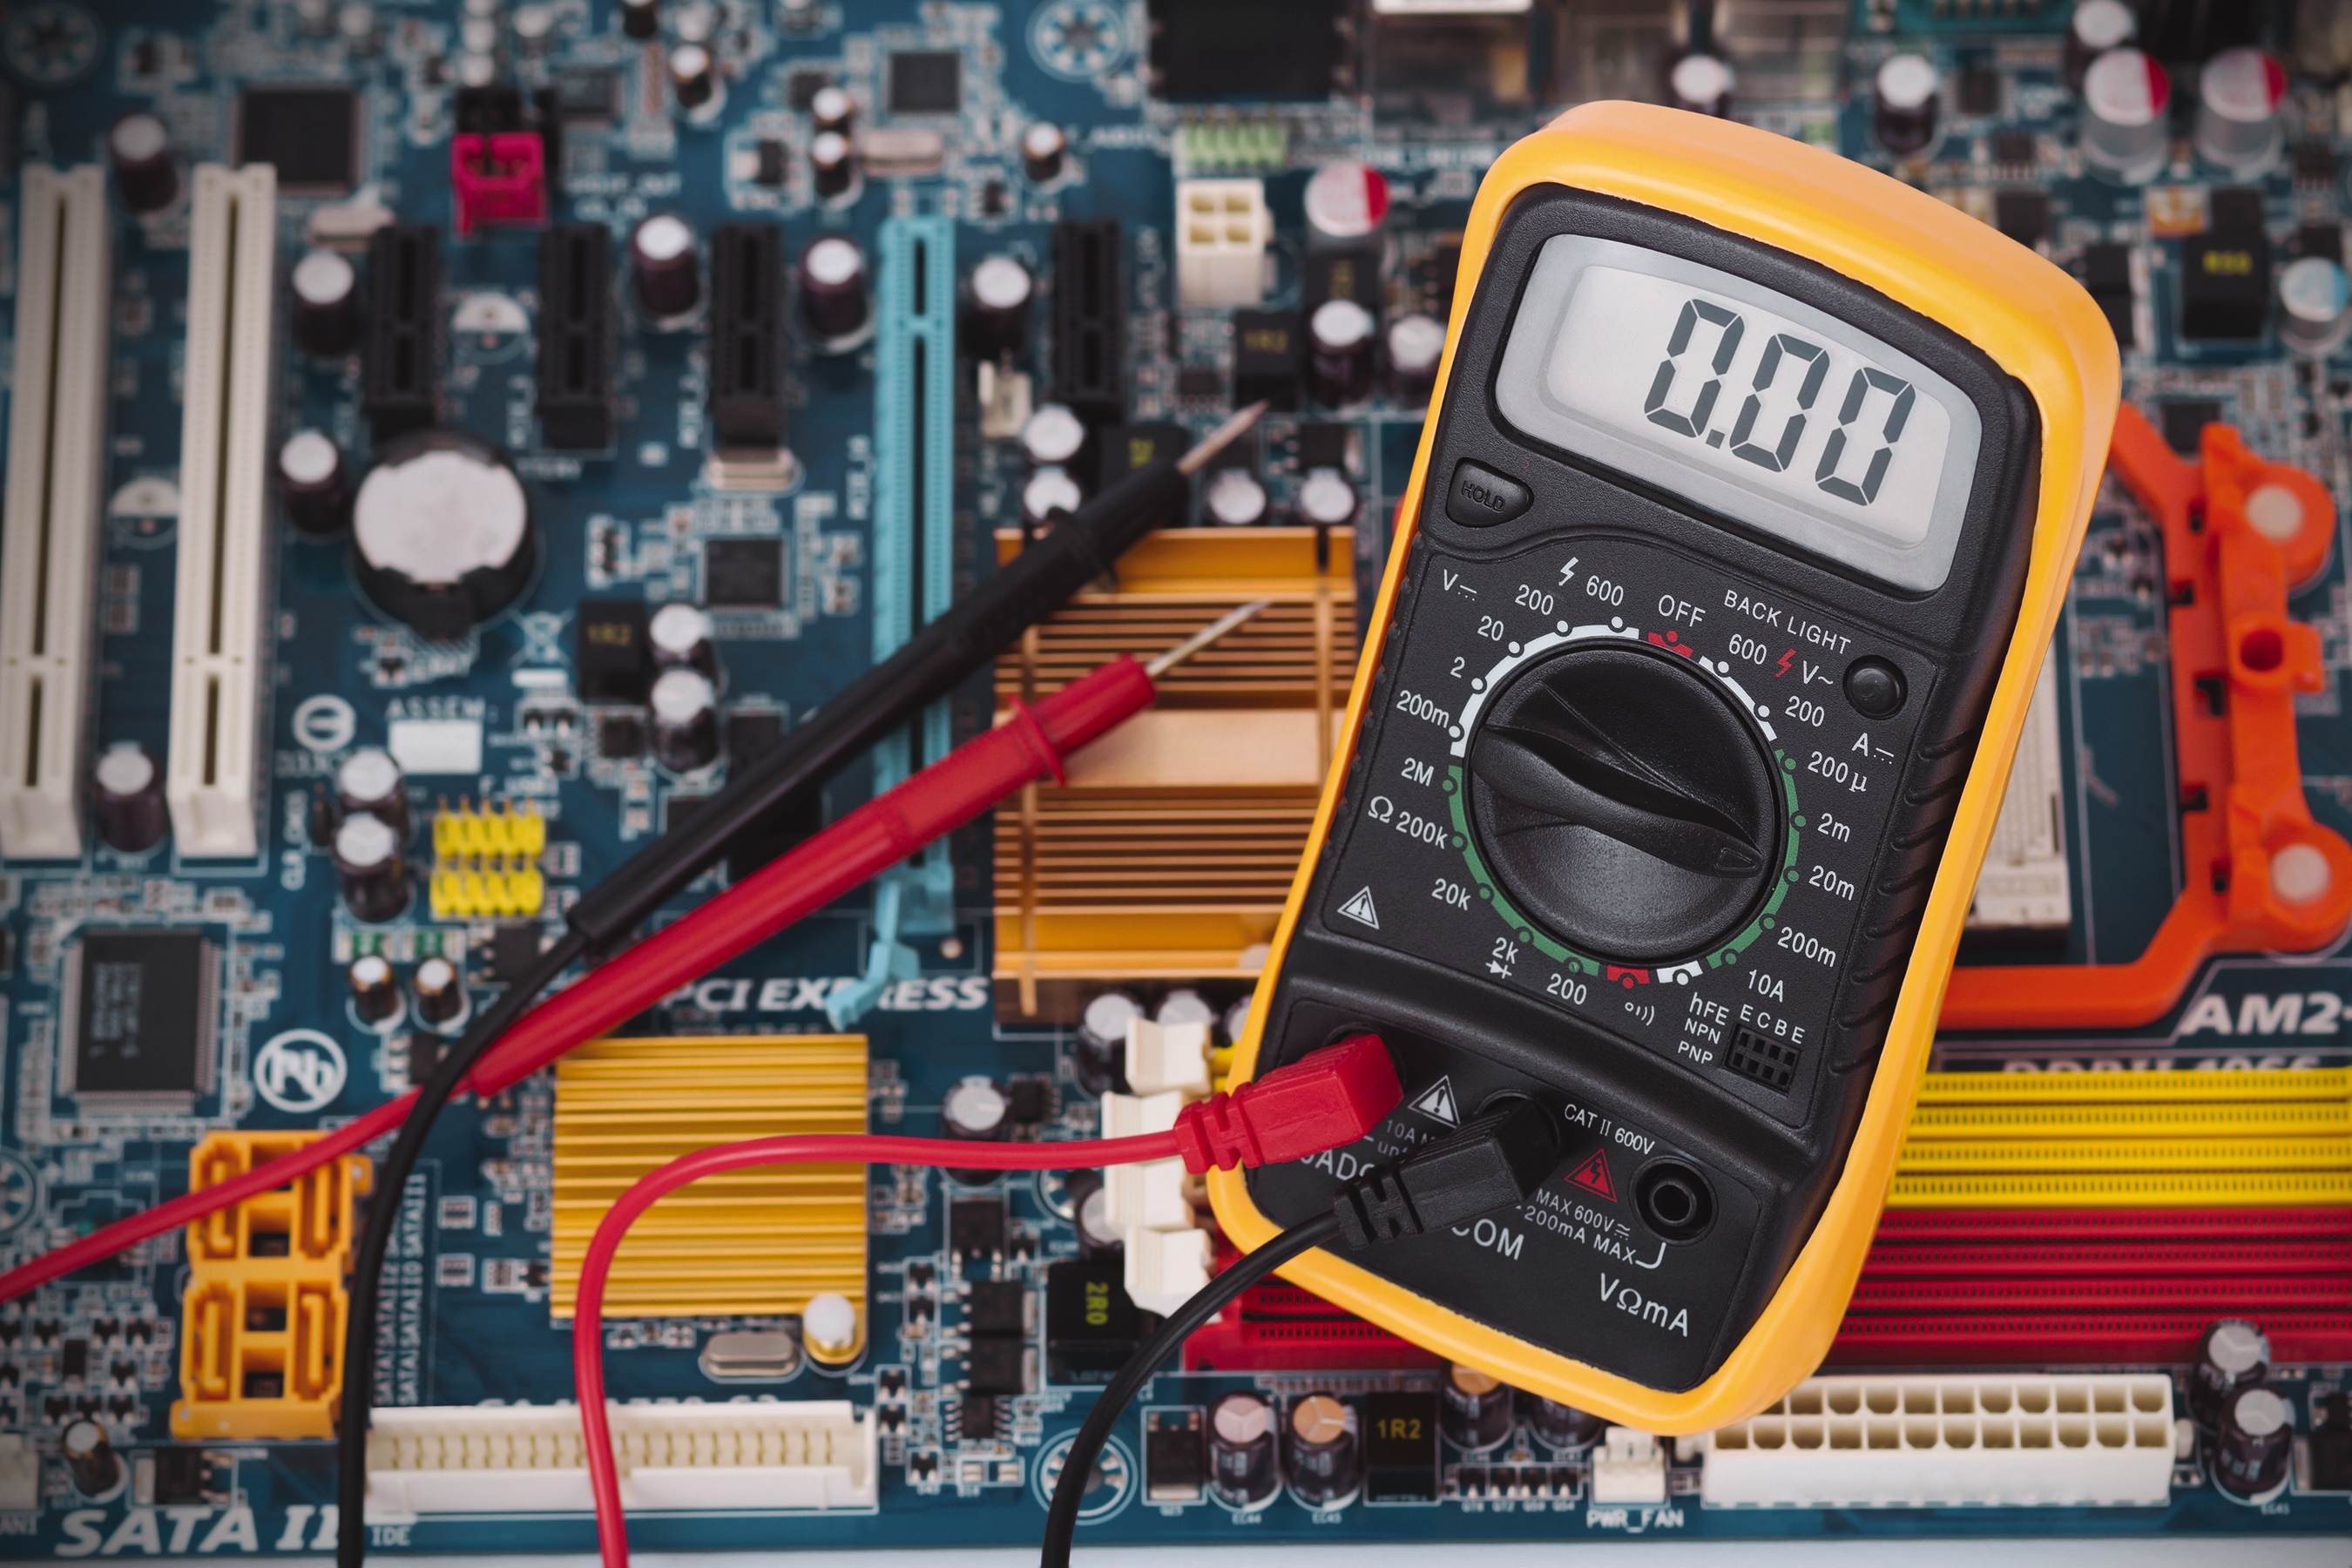 Multimeter is used to measure an electric current.